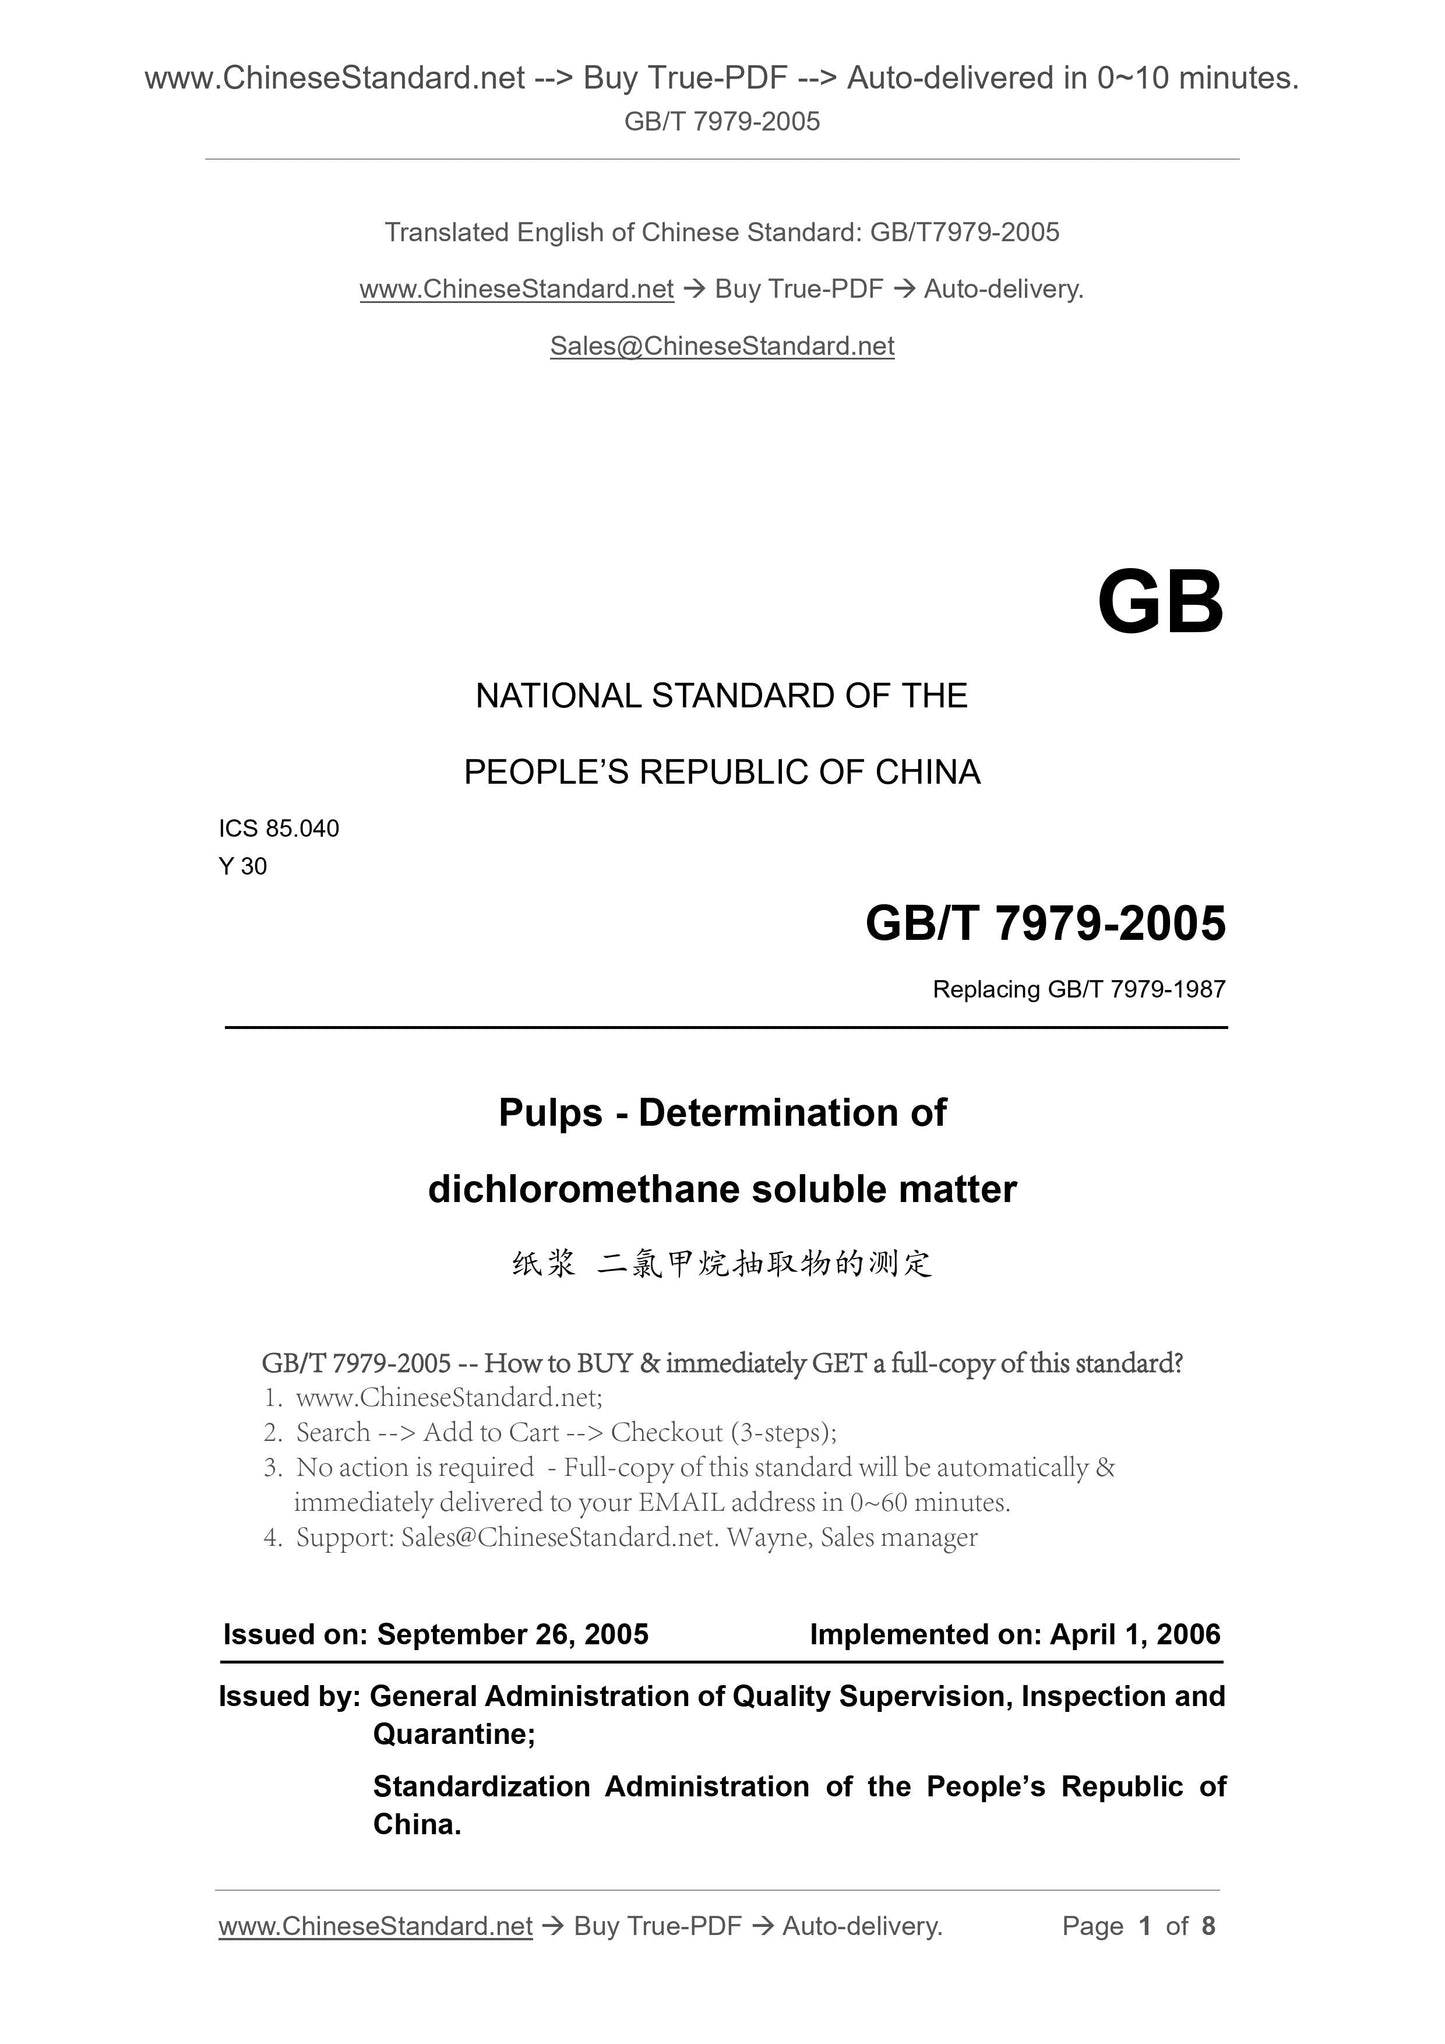 GB/T 7979-2005 Page 1